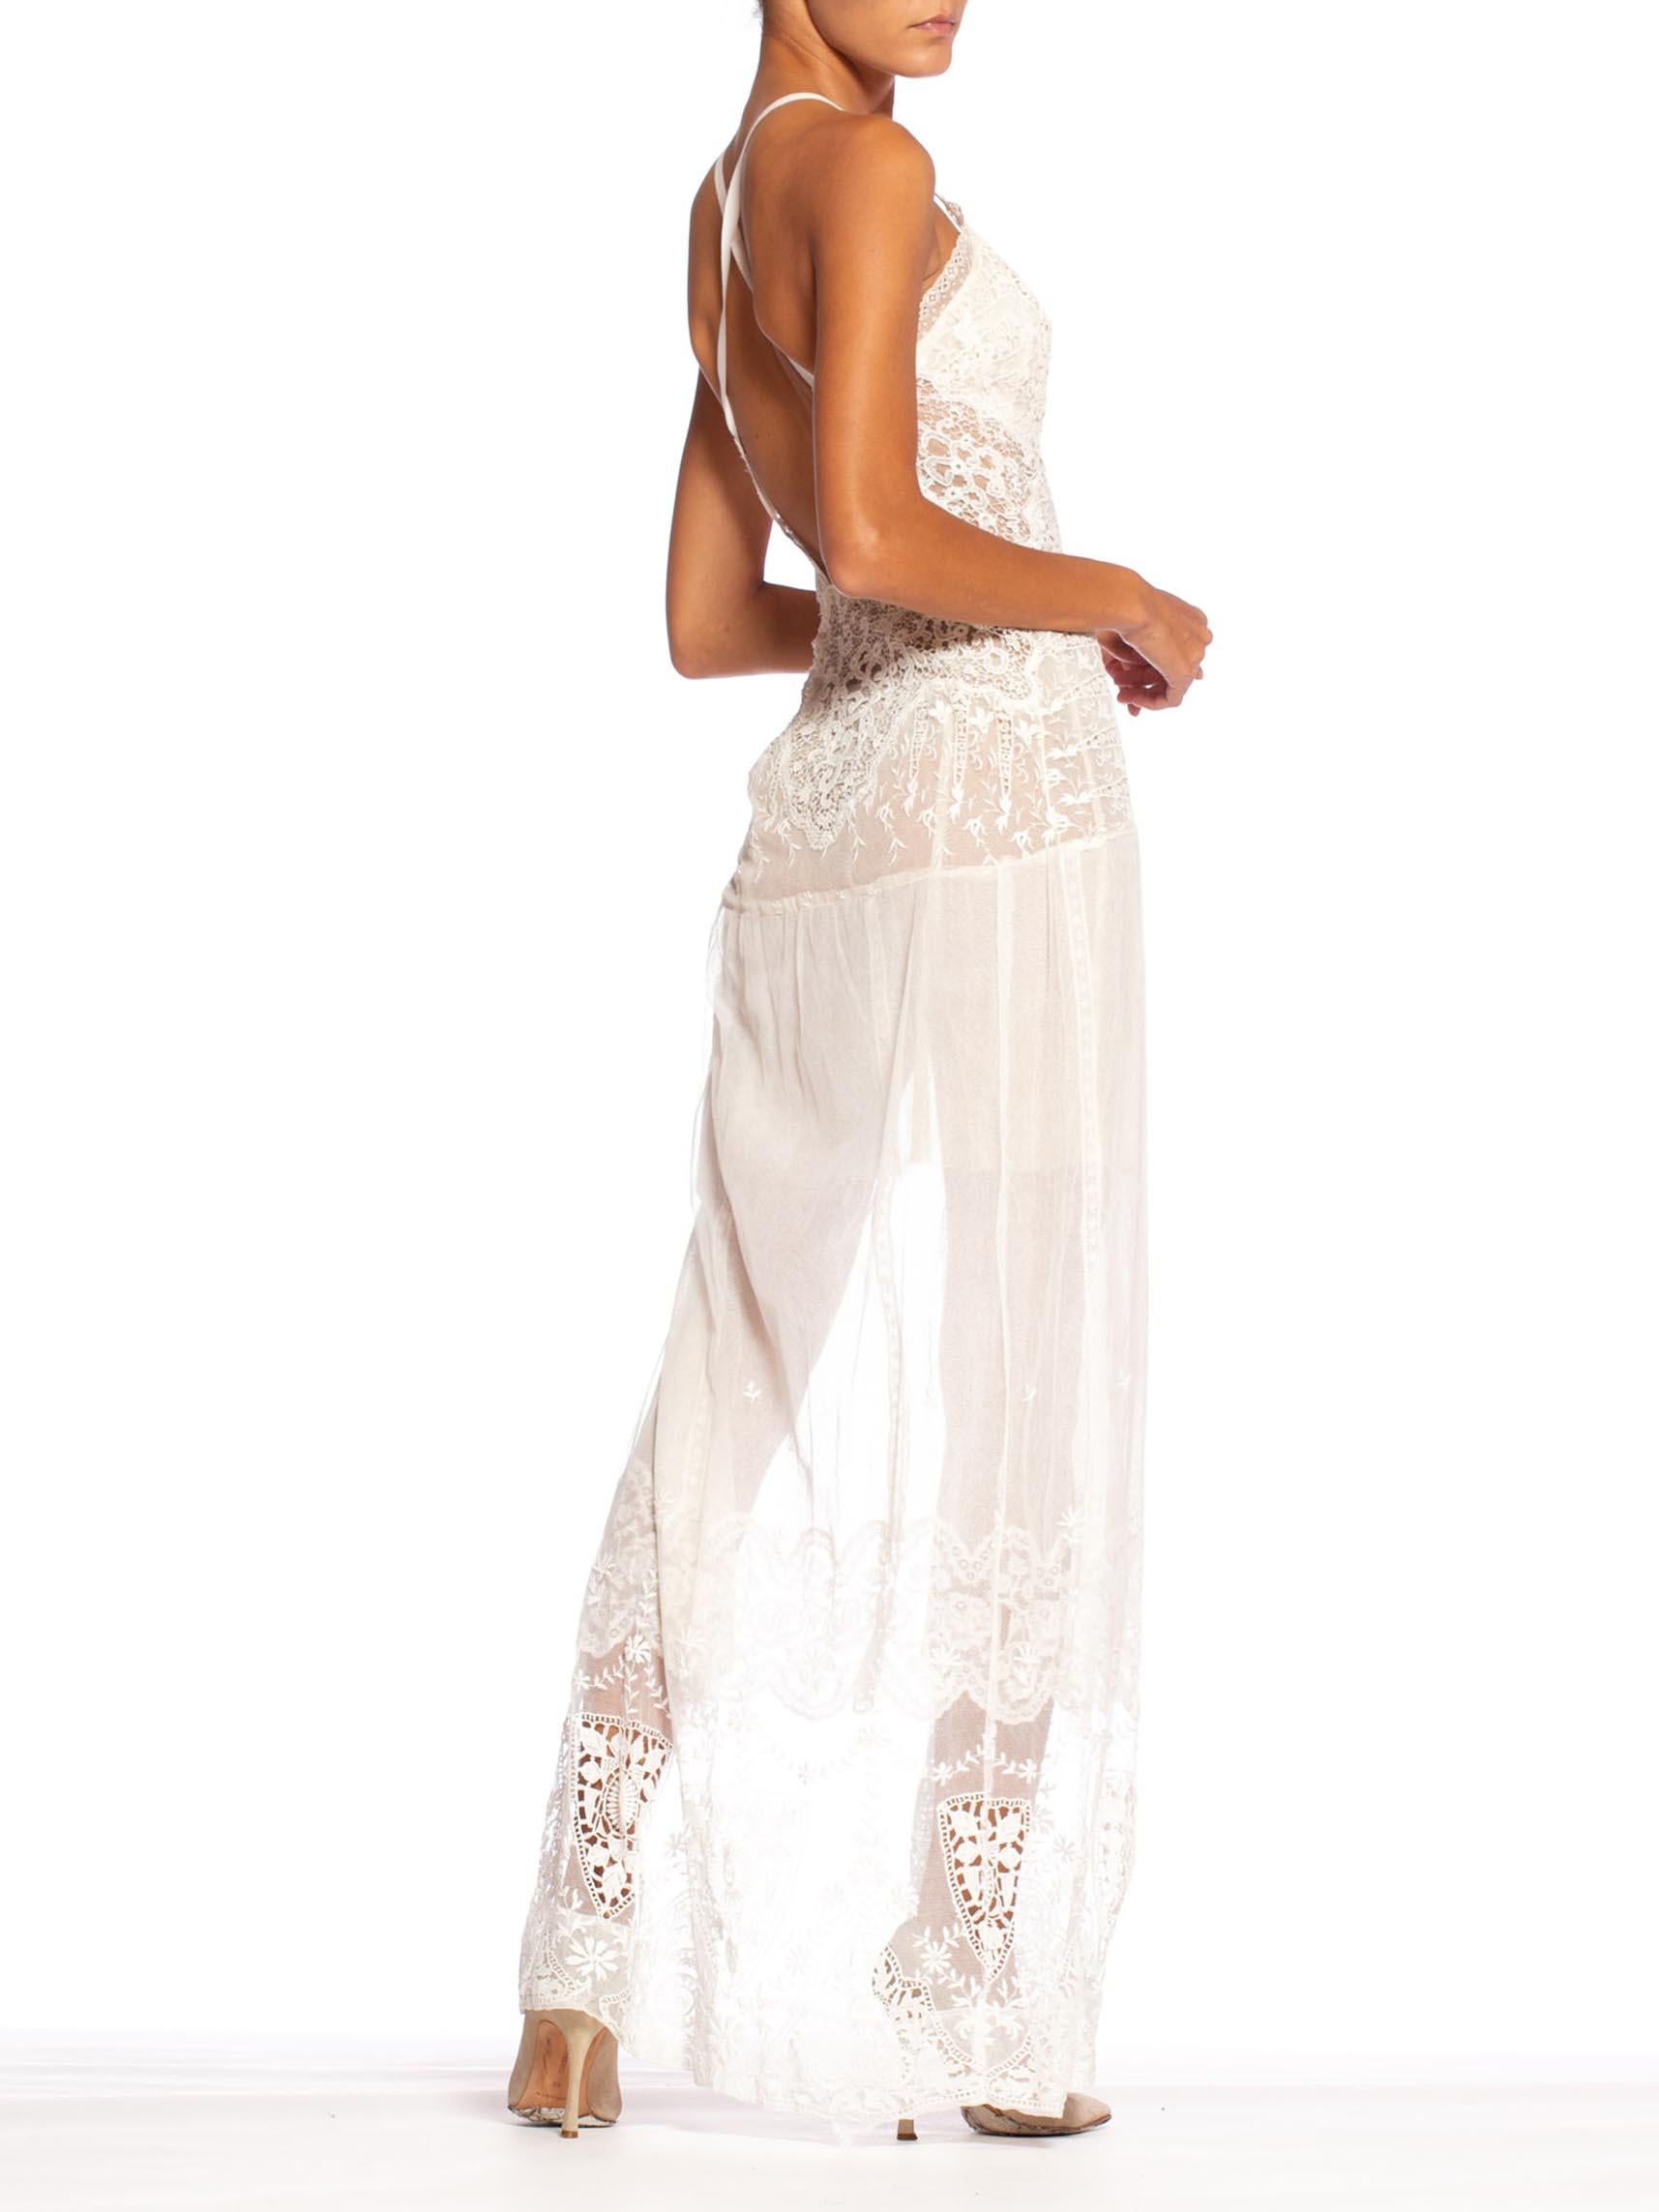 MORPHEW COLLECTION White Backless Cotton Victorian Lace & Net Dress With High S For Sale 1